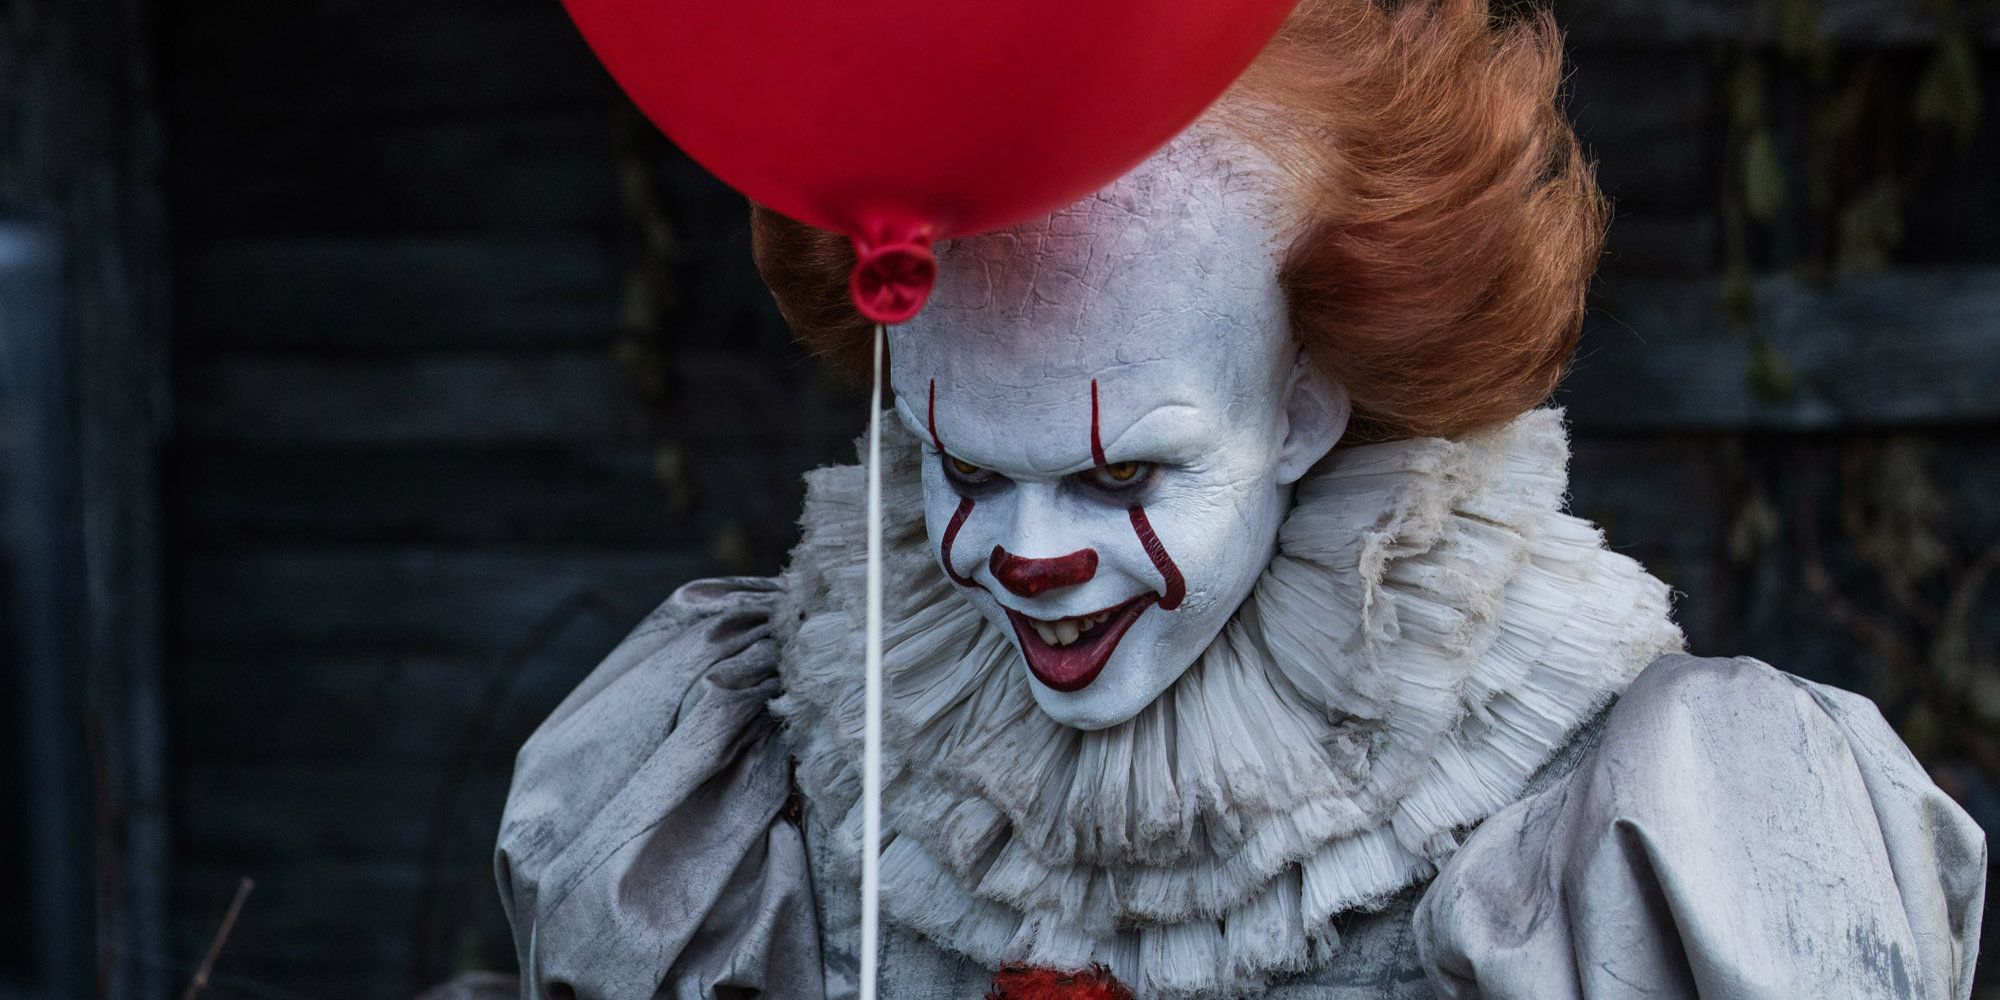 IT: Chapter 2 Should Keep The Budget Small